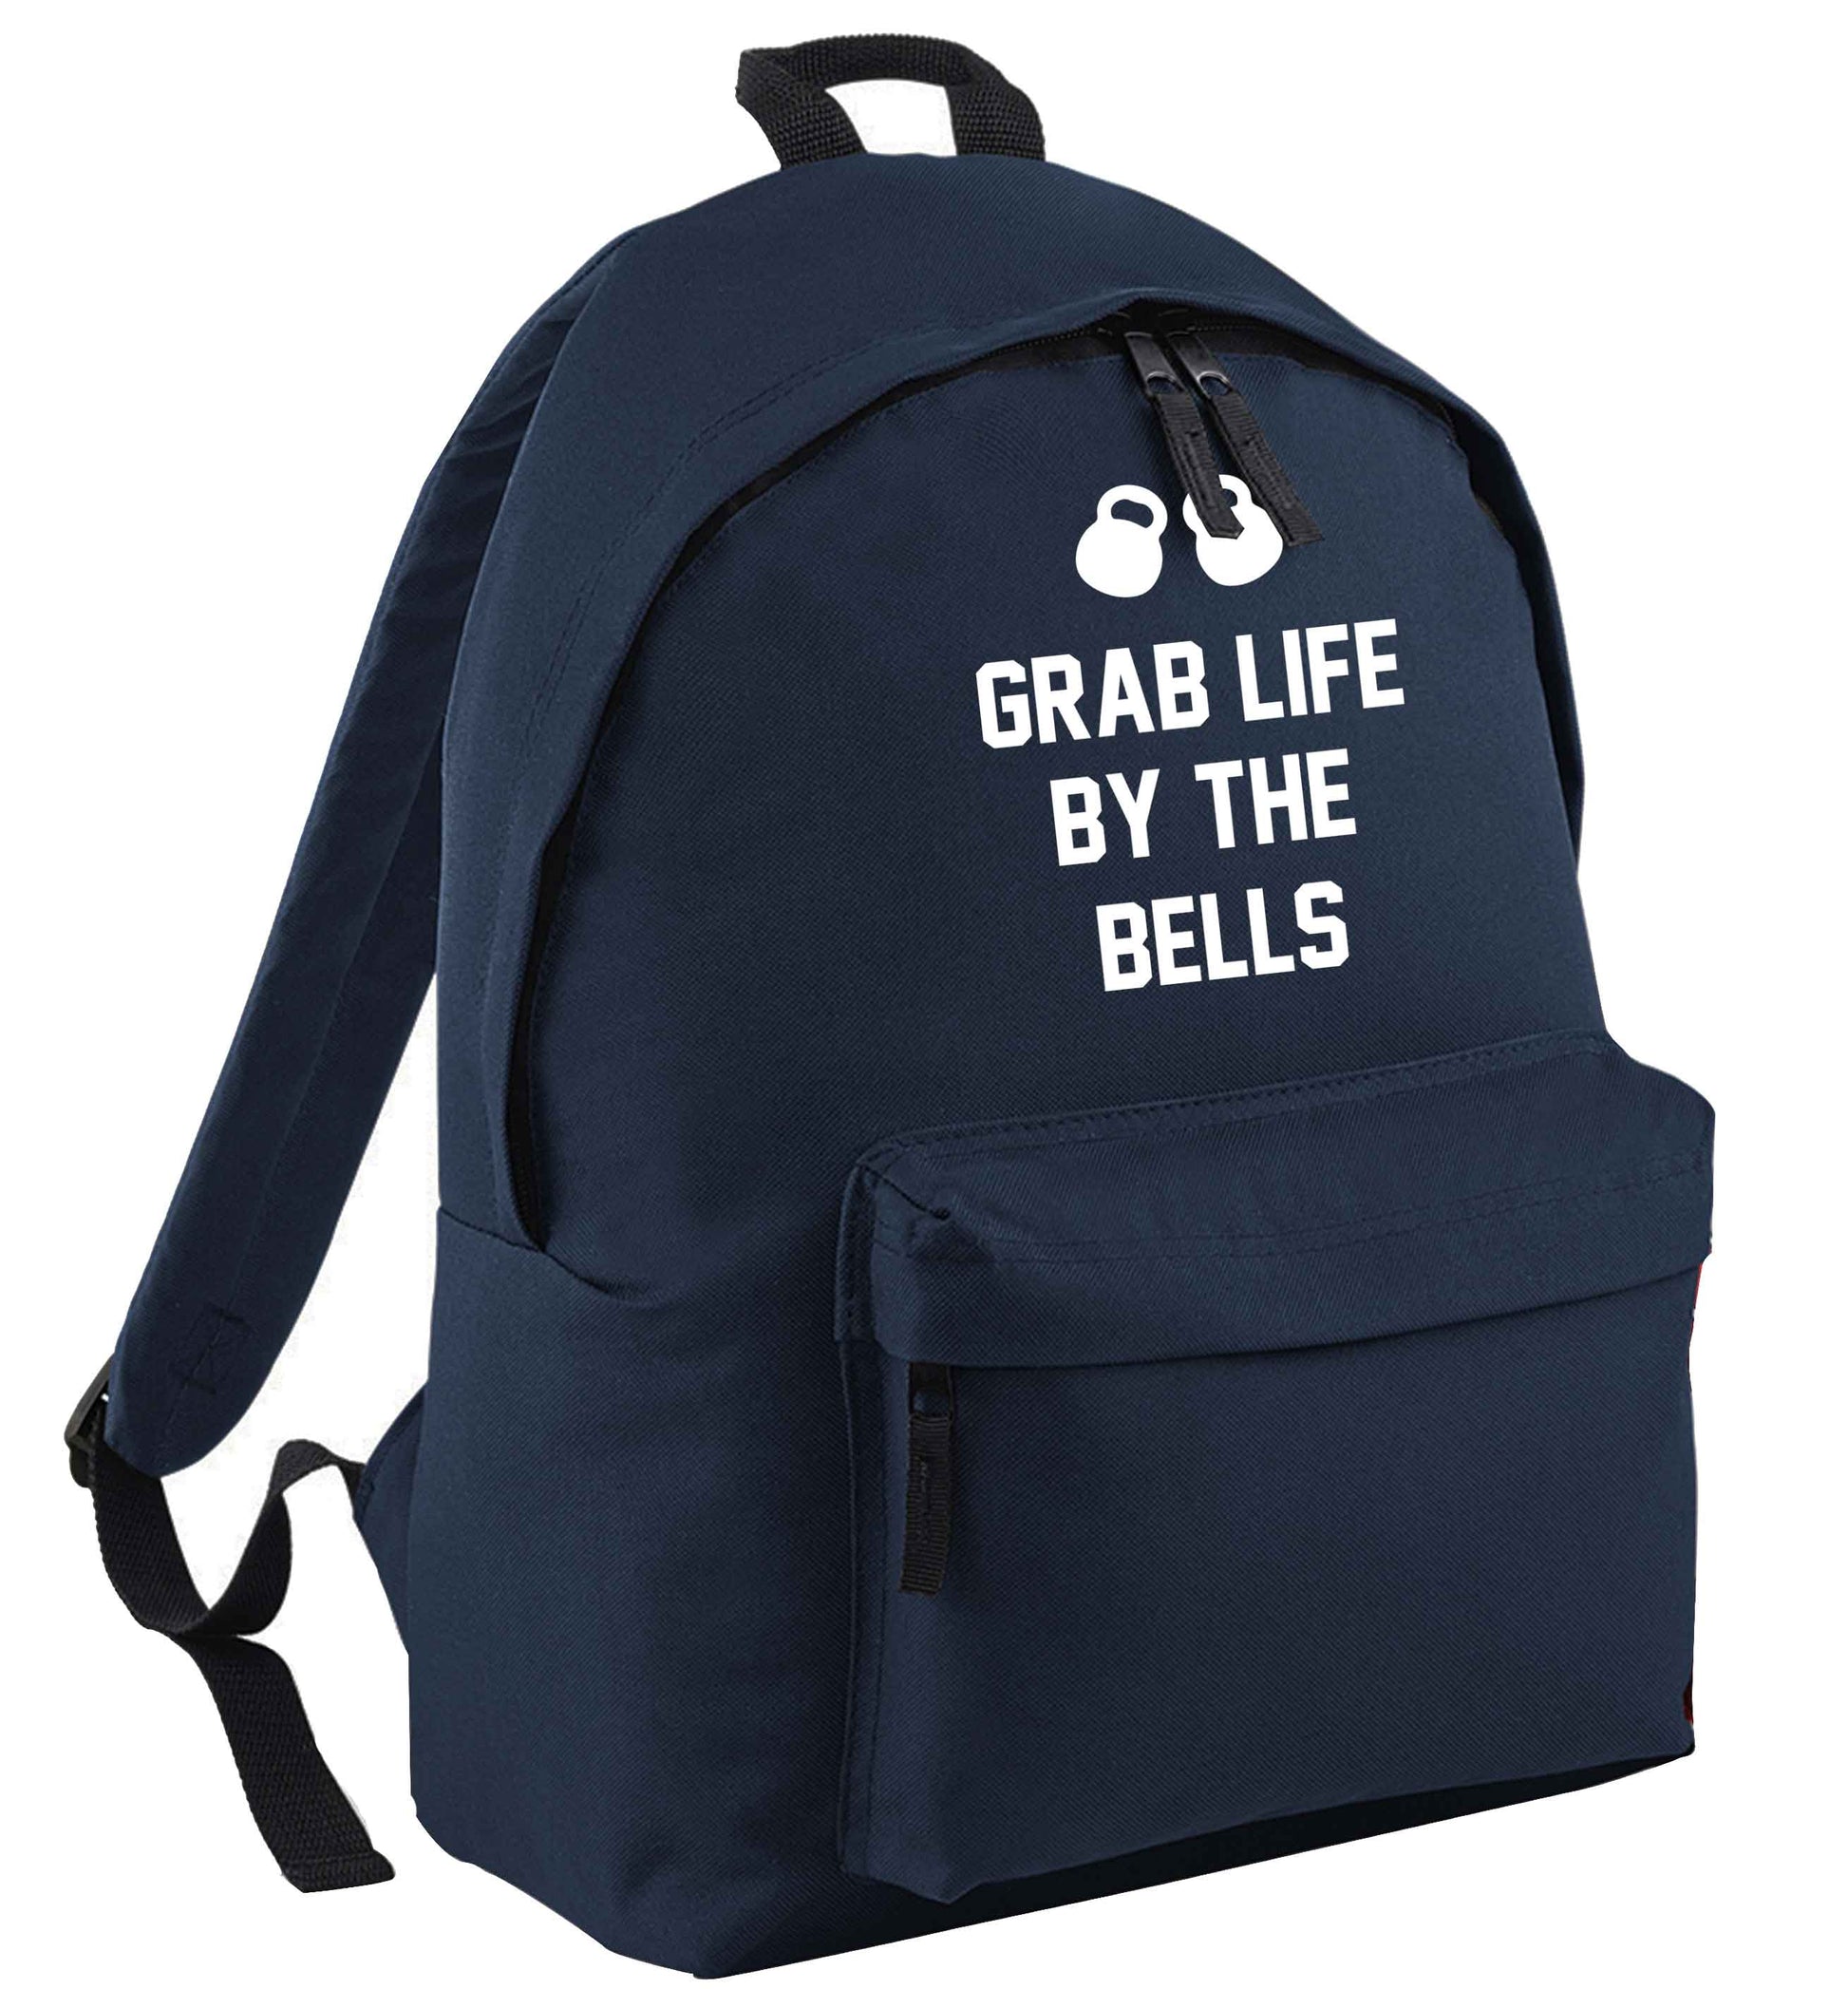 Grab life by the bells navy adults backpack